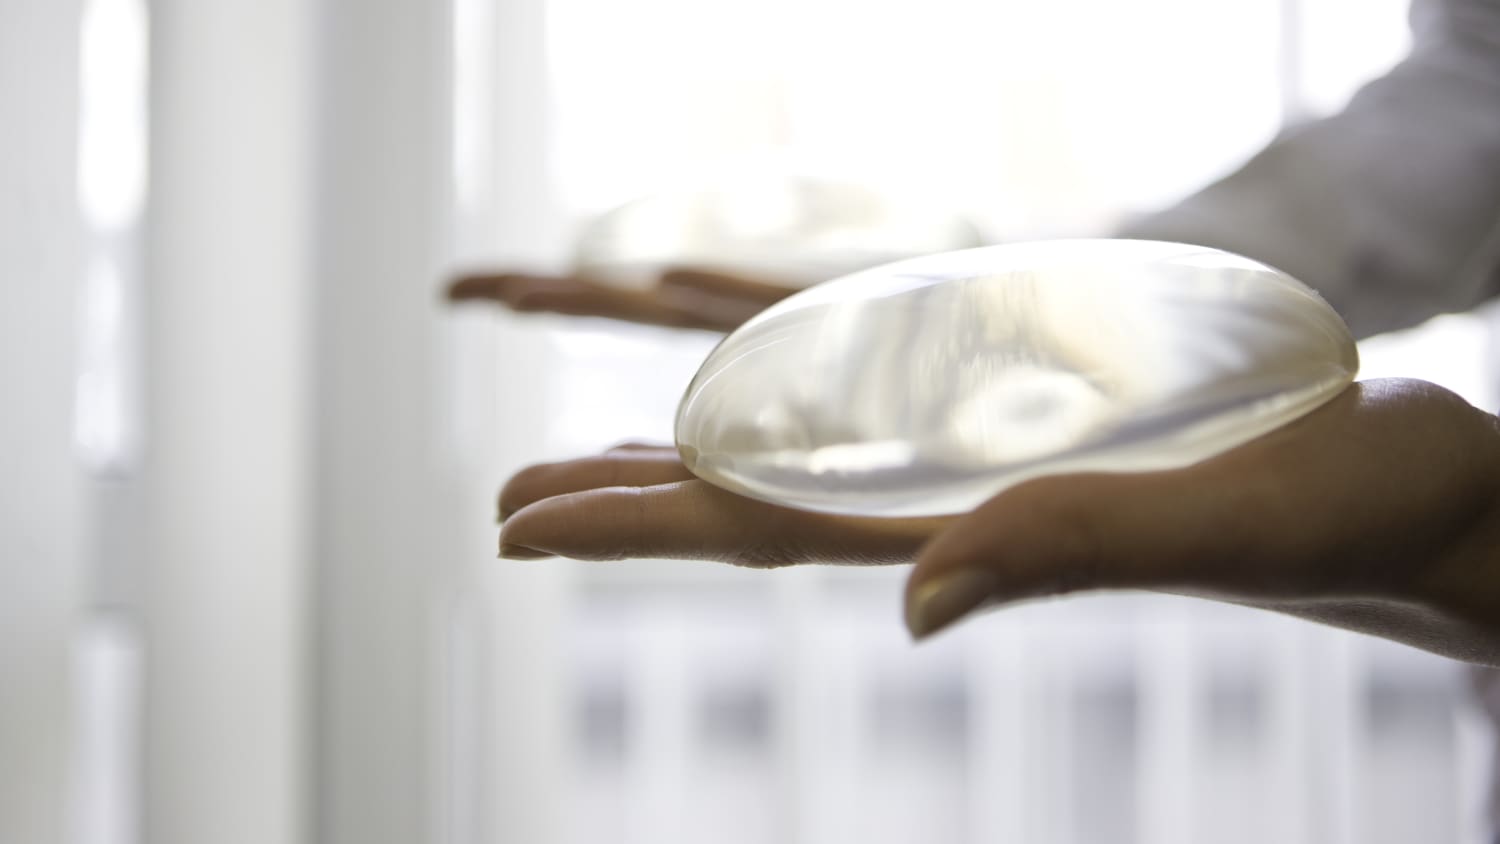 Do Breast Implants Raise Your Risk of Getting Cancer? > News > Yale Medicine